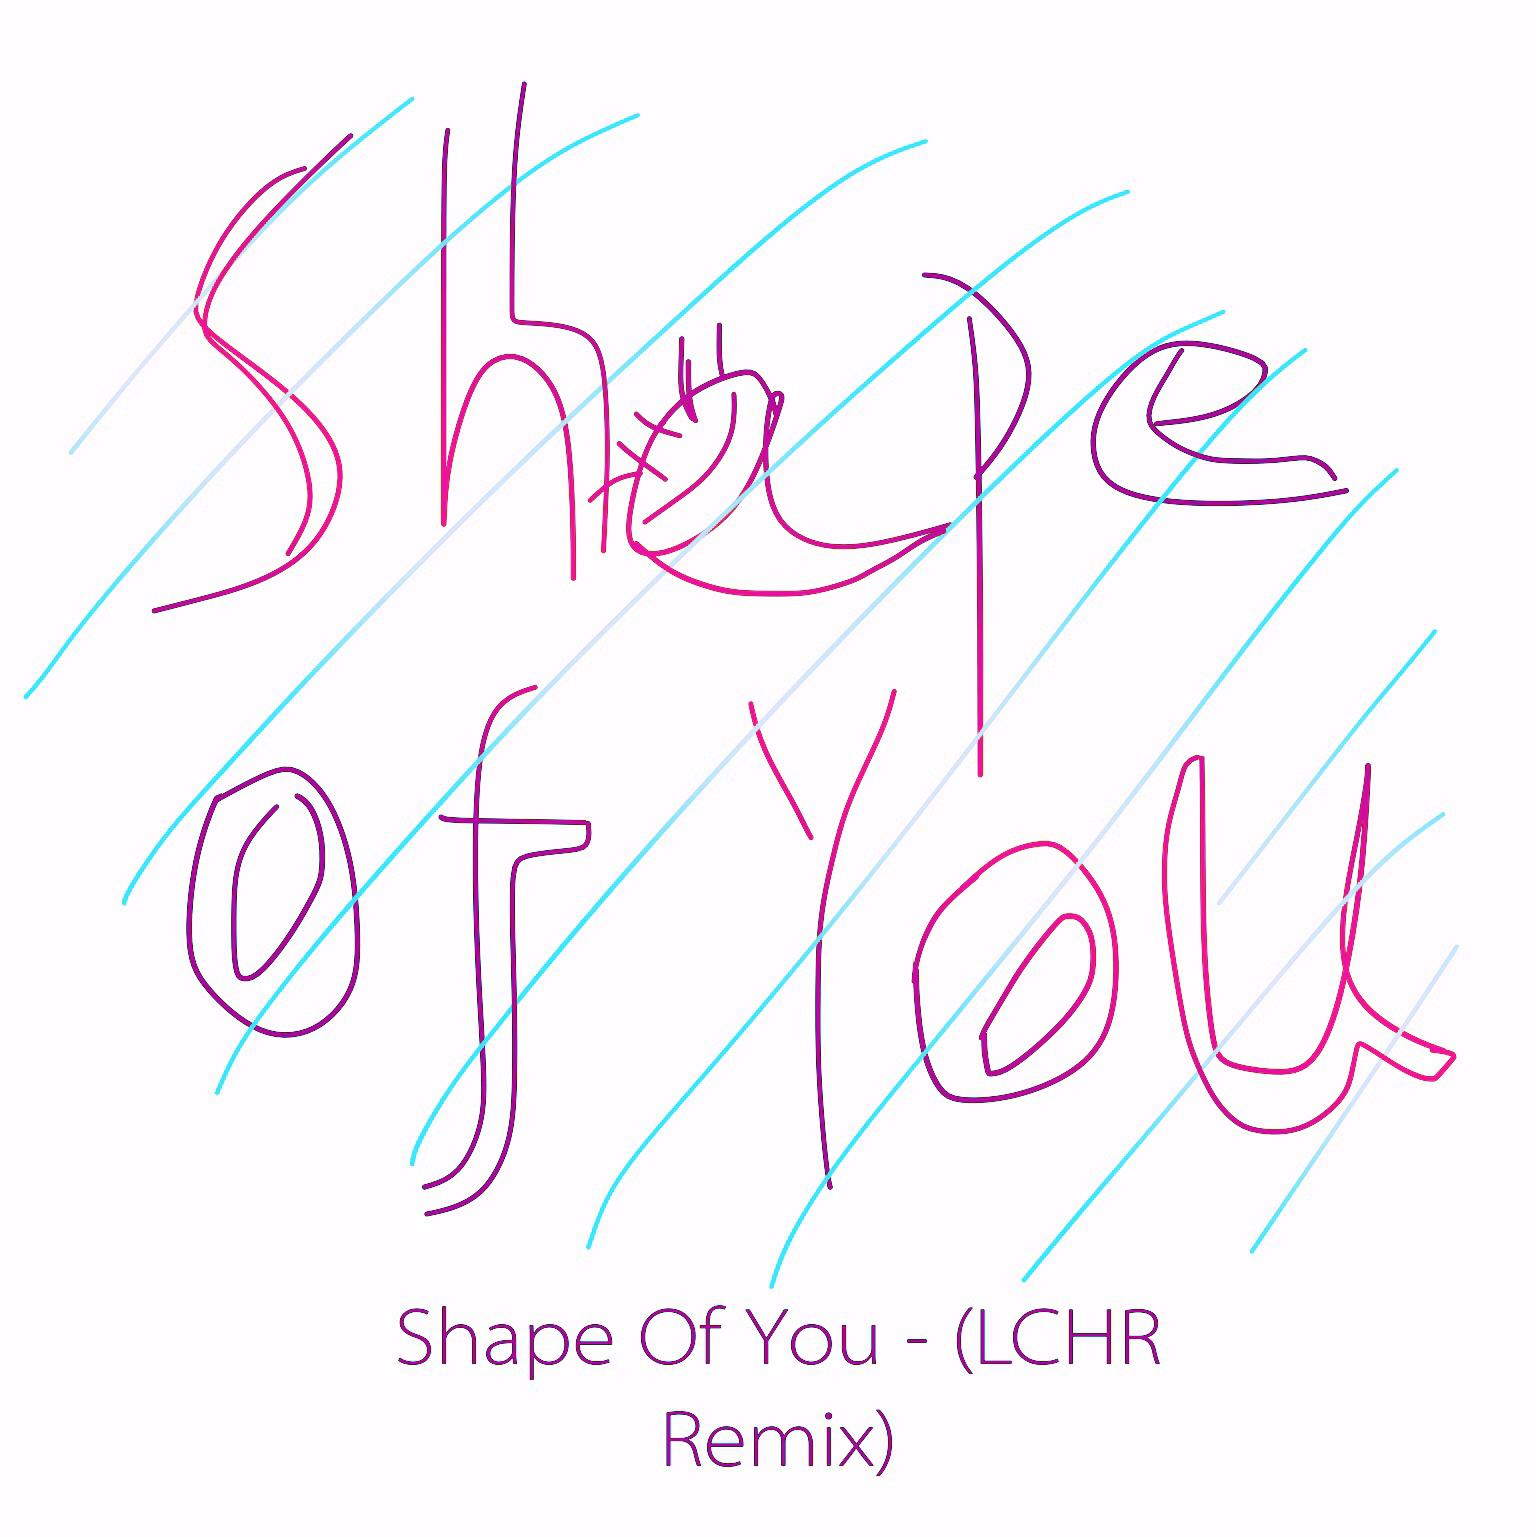 Shape Of You - (LCHR Remix)